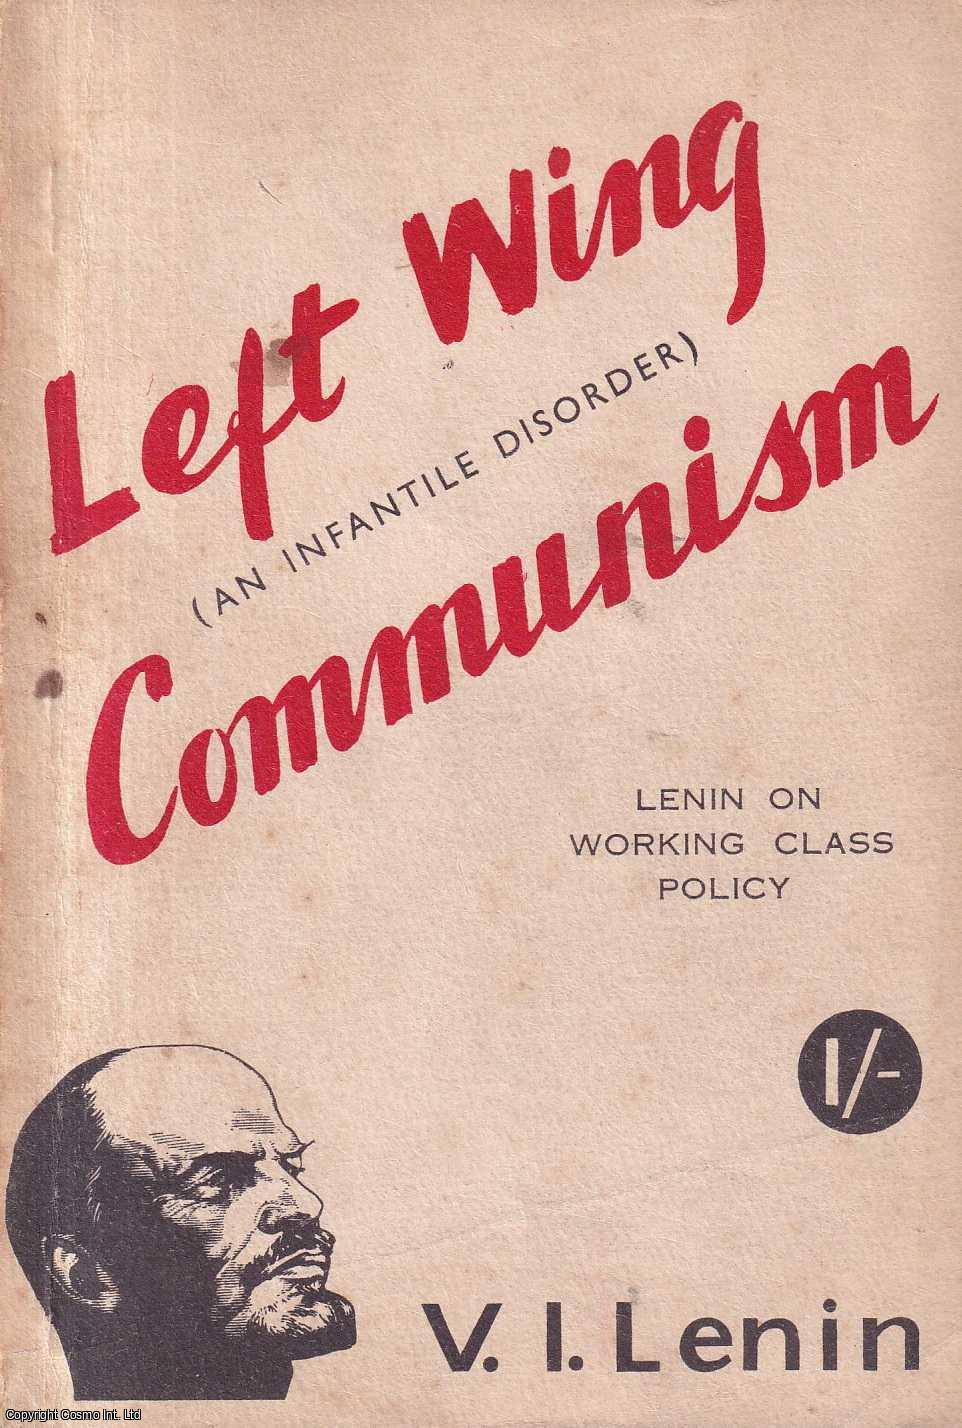 V.I. Lenin - Left Wing' Communism: An Infantile Disorder. An Attempt at a Popular Discussion on Marxist Strategy and Tactics. Published by International Bookshop Melbourne.